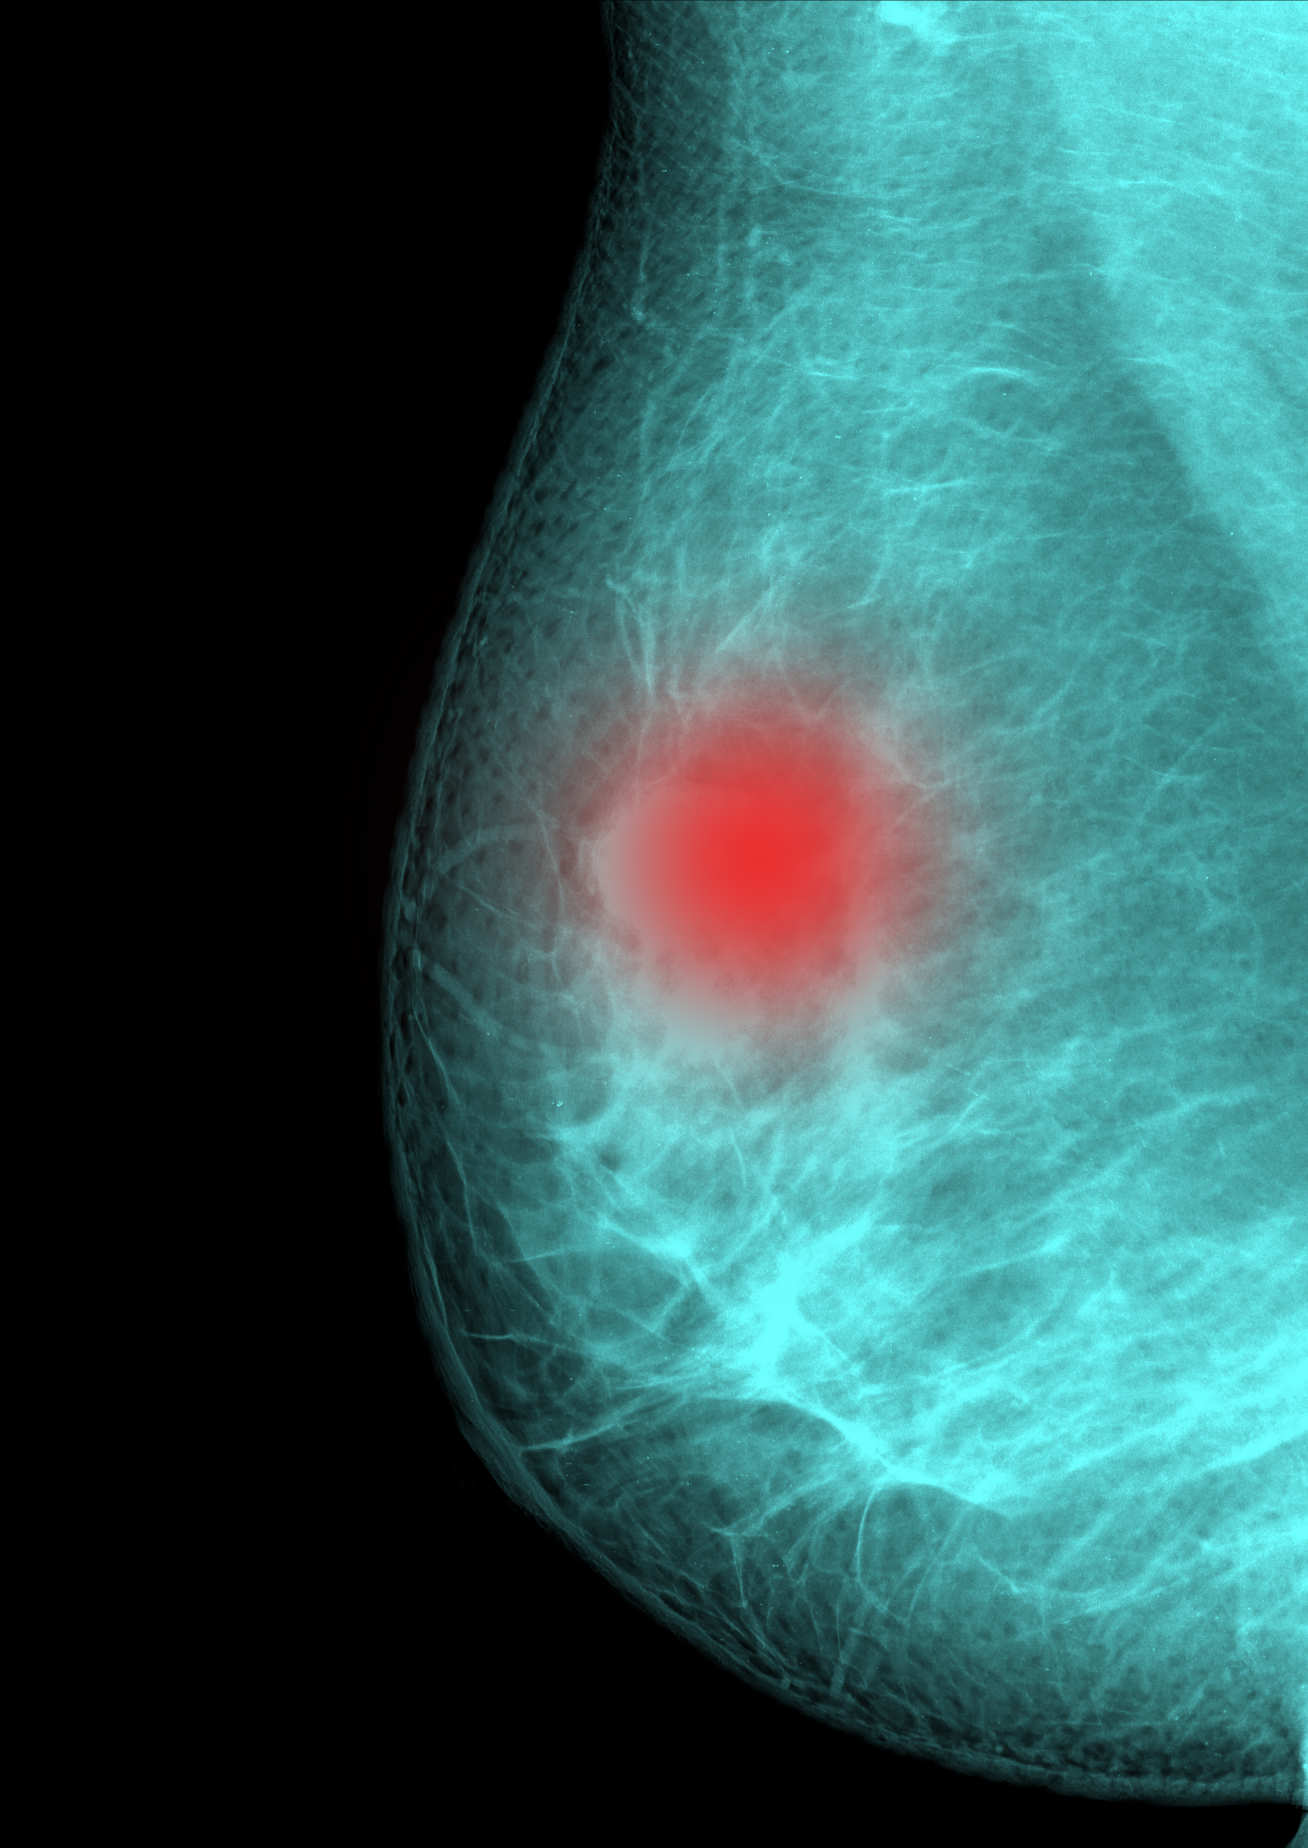 Up to one in five breast cancers are thought to be linked to faulty genes